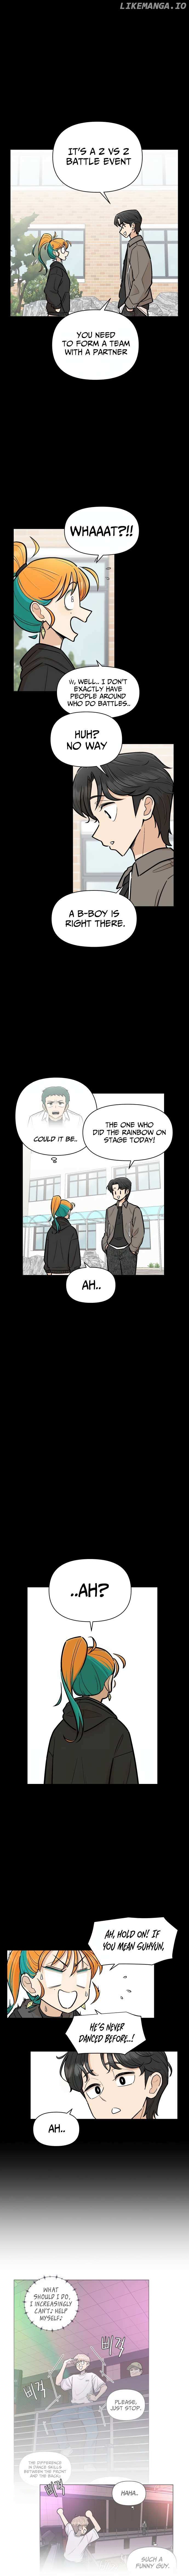 School of Streets Chapter 7 - page 13